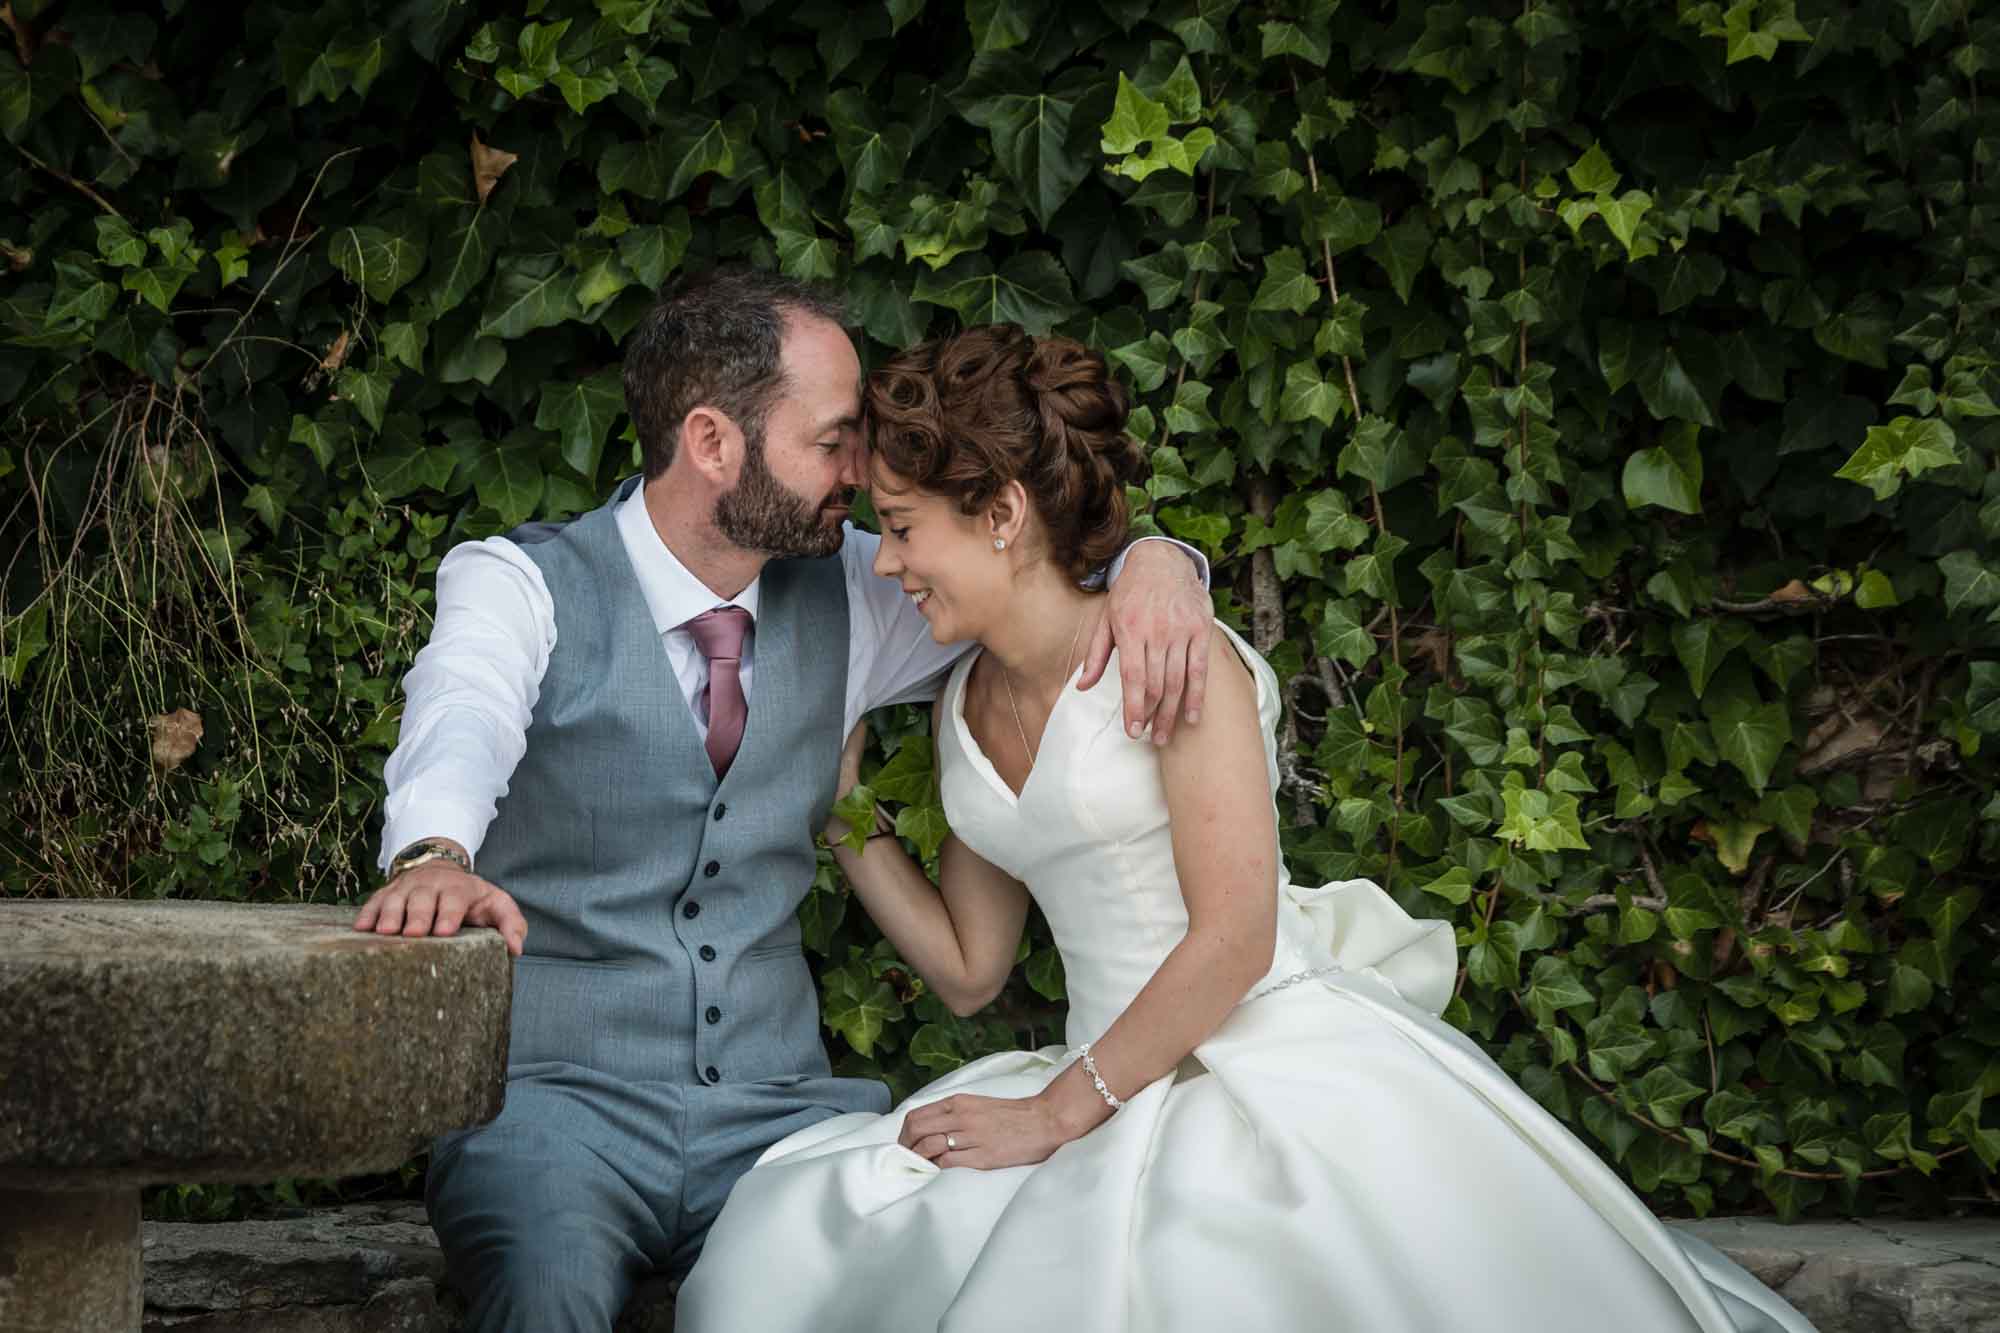 An intimate moment between the bride and groom at their Mallorca finca wedding